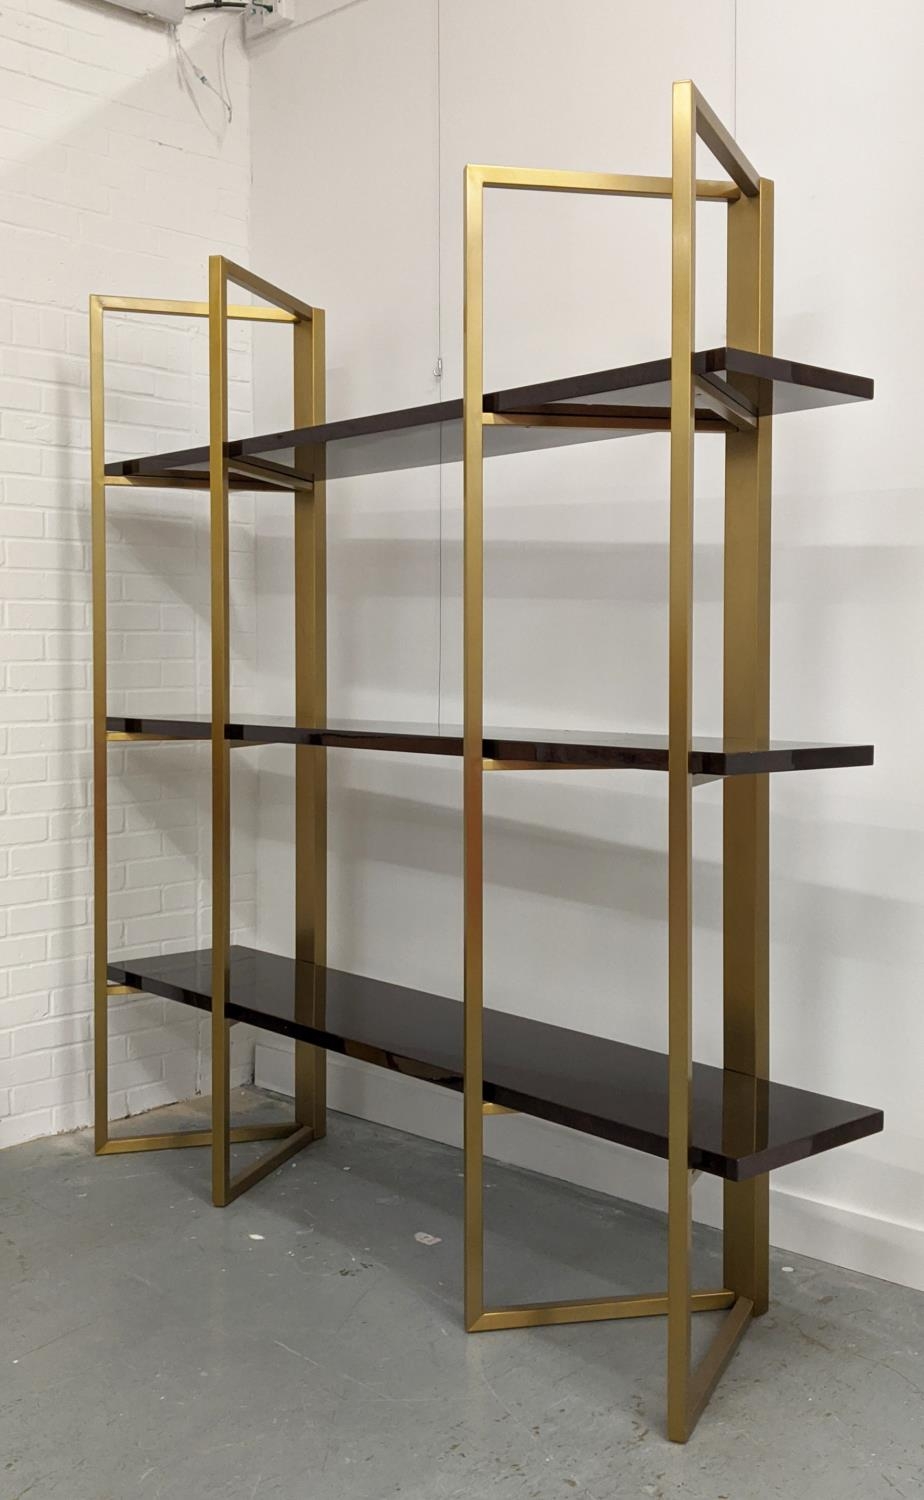 BOOKCASE, two gilt metal supports holding three veneered shelves, 200cm x 50cm x 208.5cm approx. - Image 2 of 6